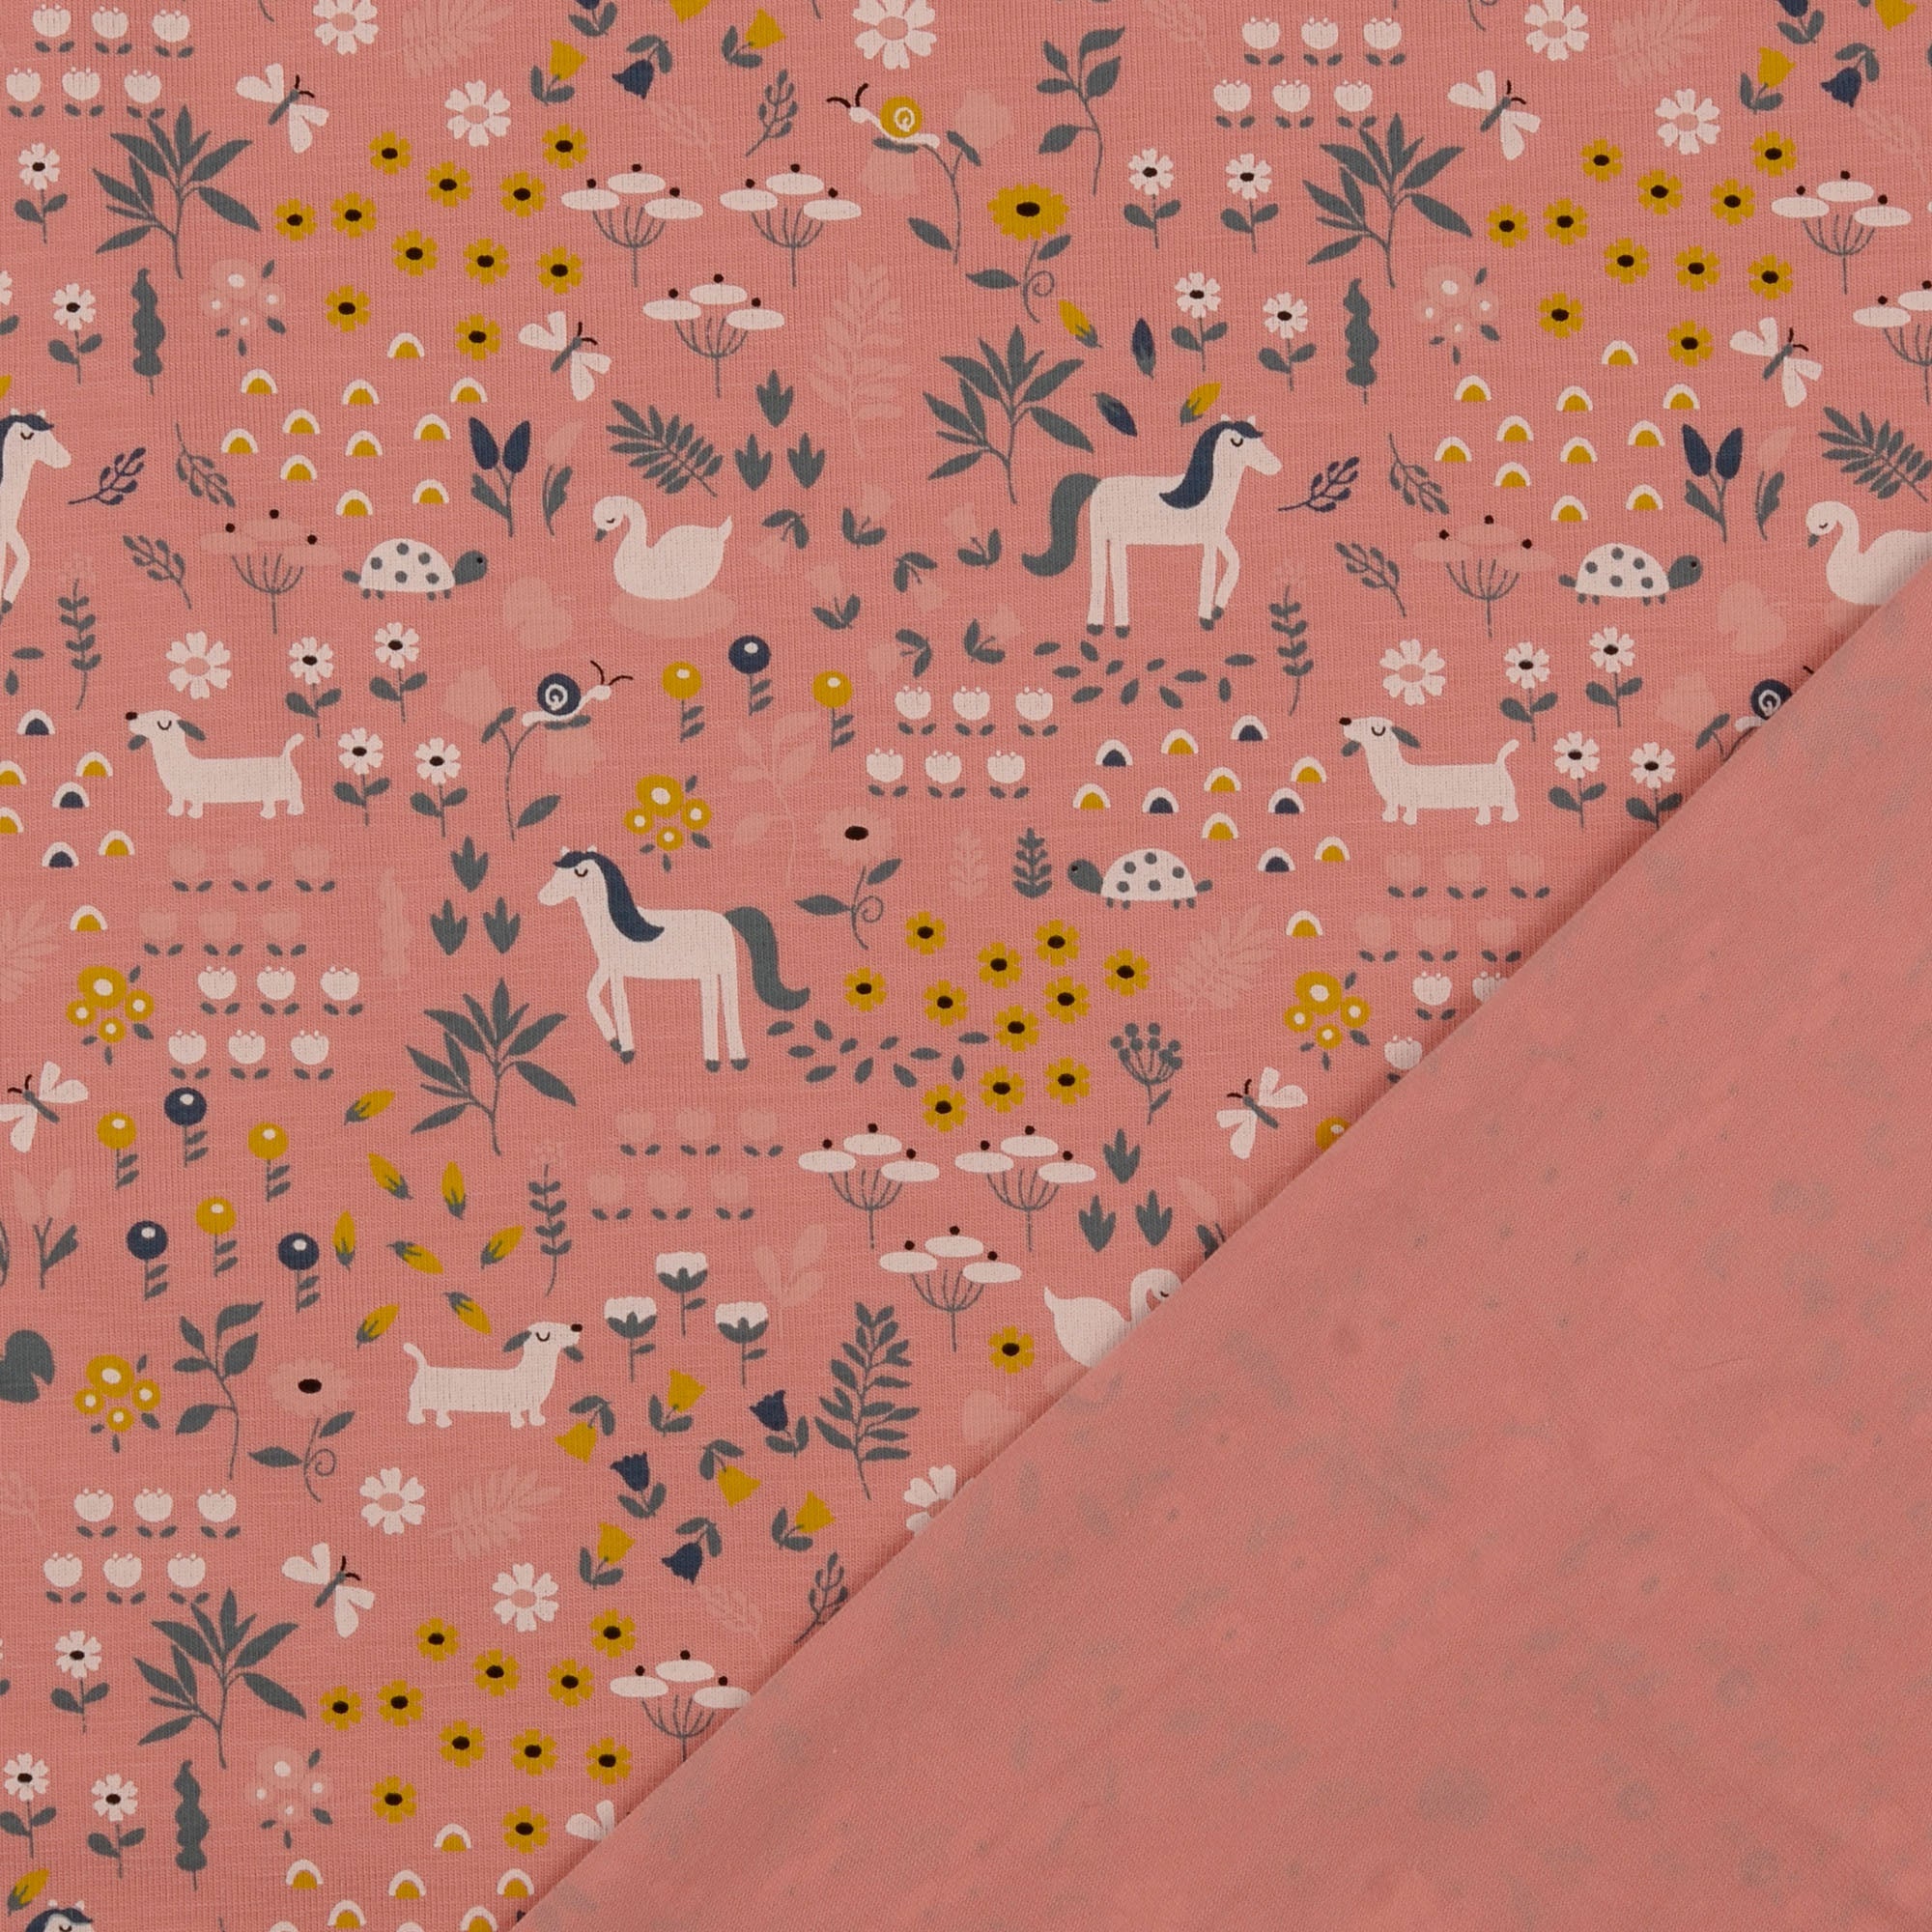 REMNANT 1.2 Metres - (Fault 2 inch hole with marks round) Animals Pink Organic Cotton Jersey Fabric